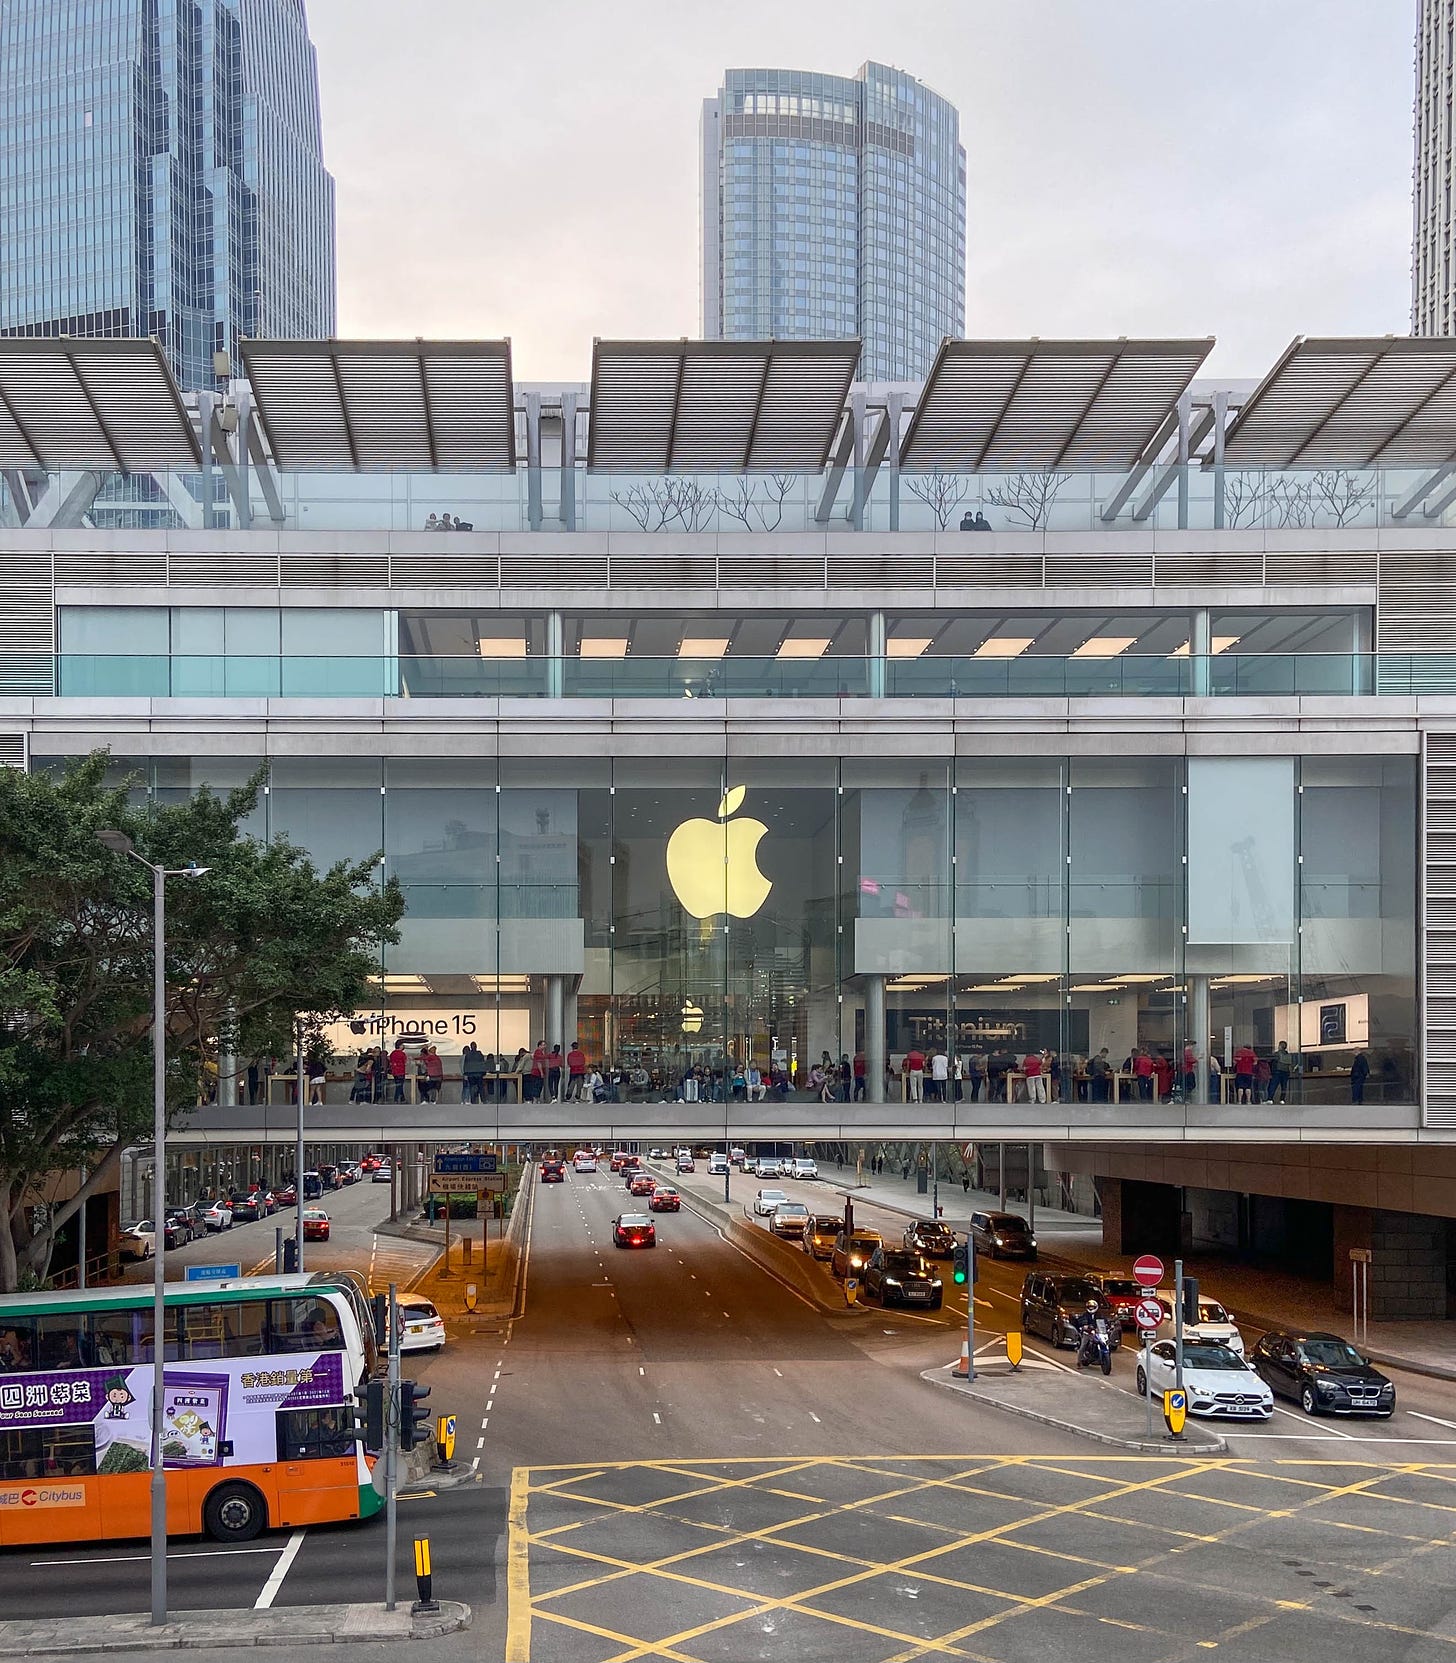 The exterior of Apple ifc mall following third floor renovations. A large portion of the upper level is blocked off, and the entire second floor is closed for further changes.